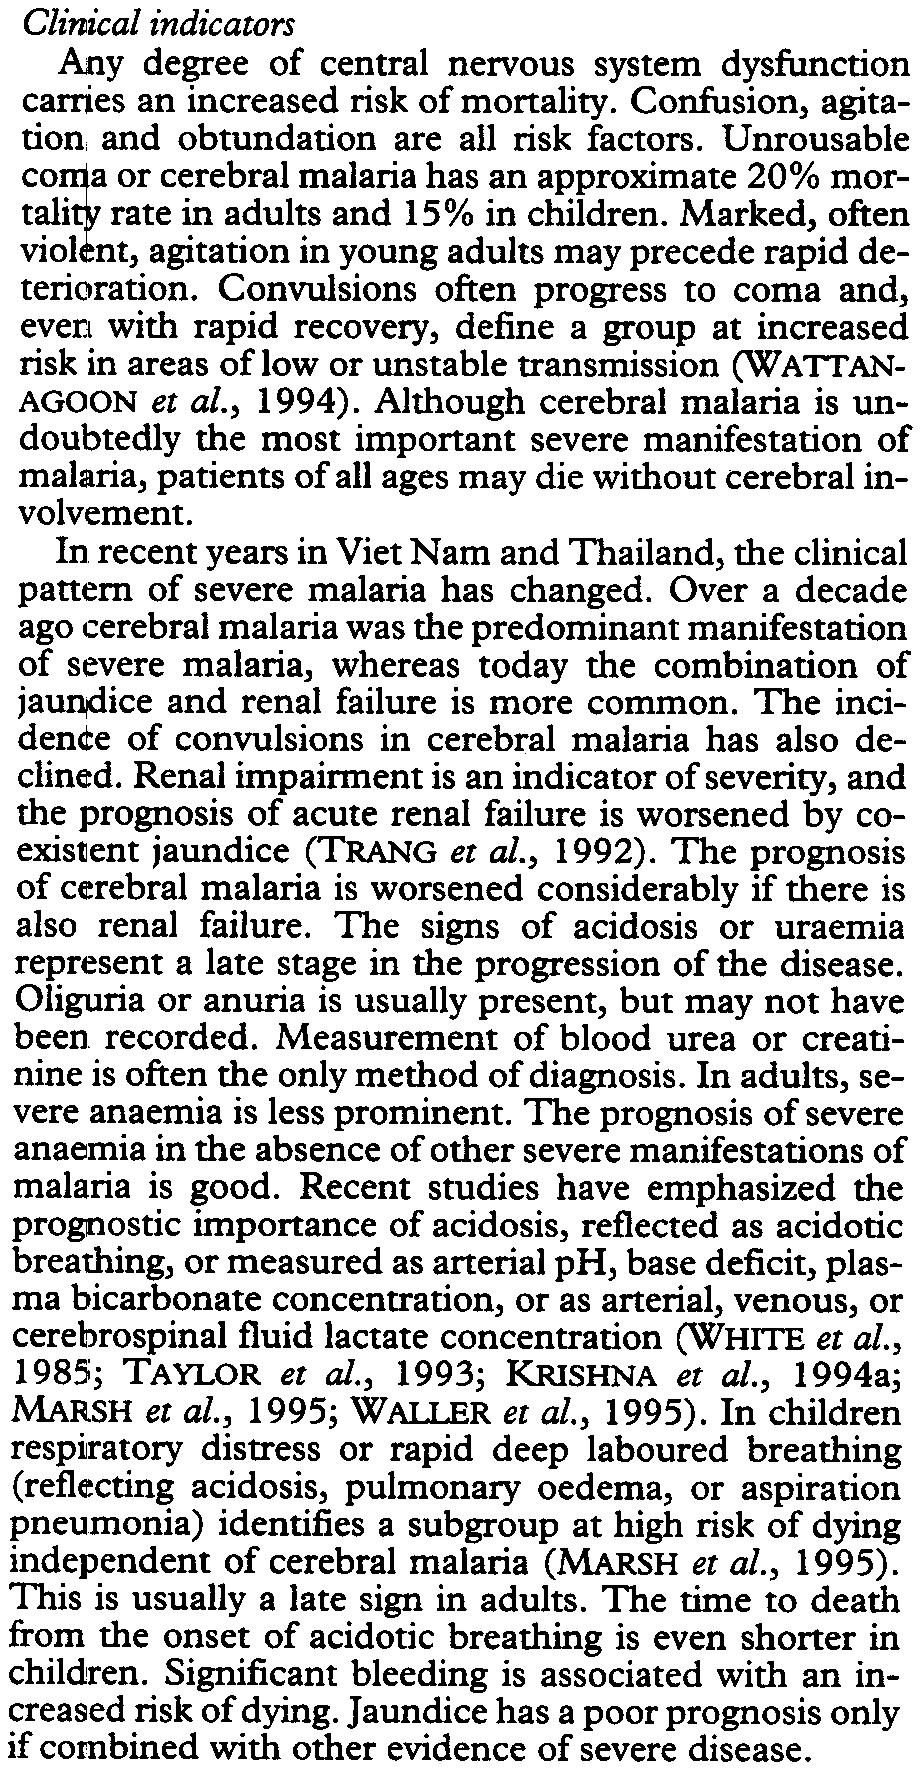 Unrousable co or cerebral malaria has an approximate 20% mortali rate in adults and 15% in children. Marked, often viol nt, agitation in young adults may precede rapid deterioration.